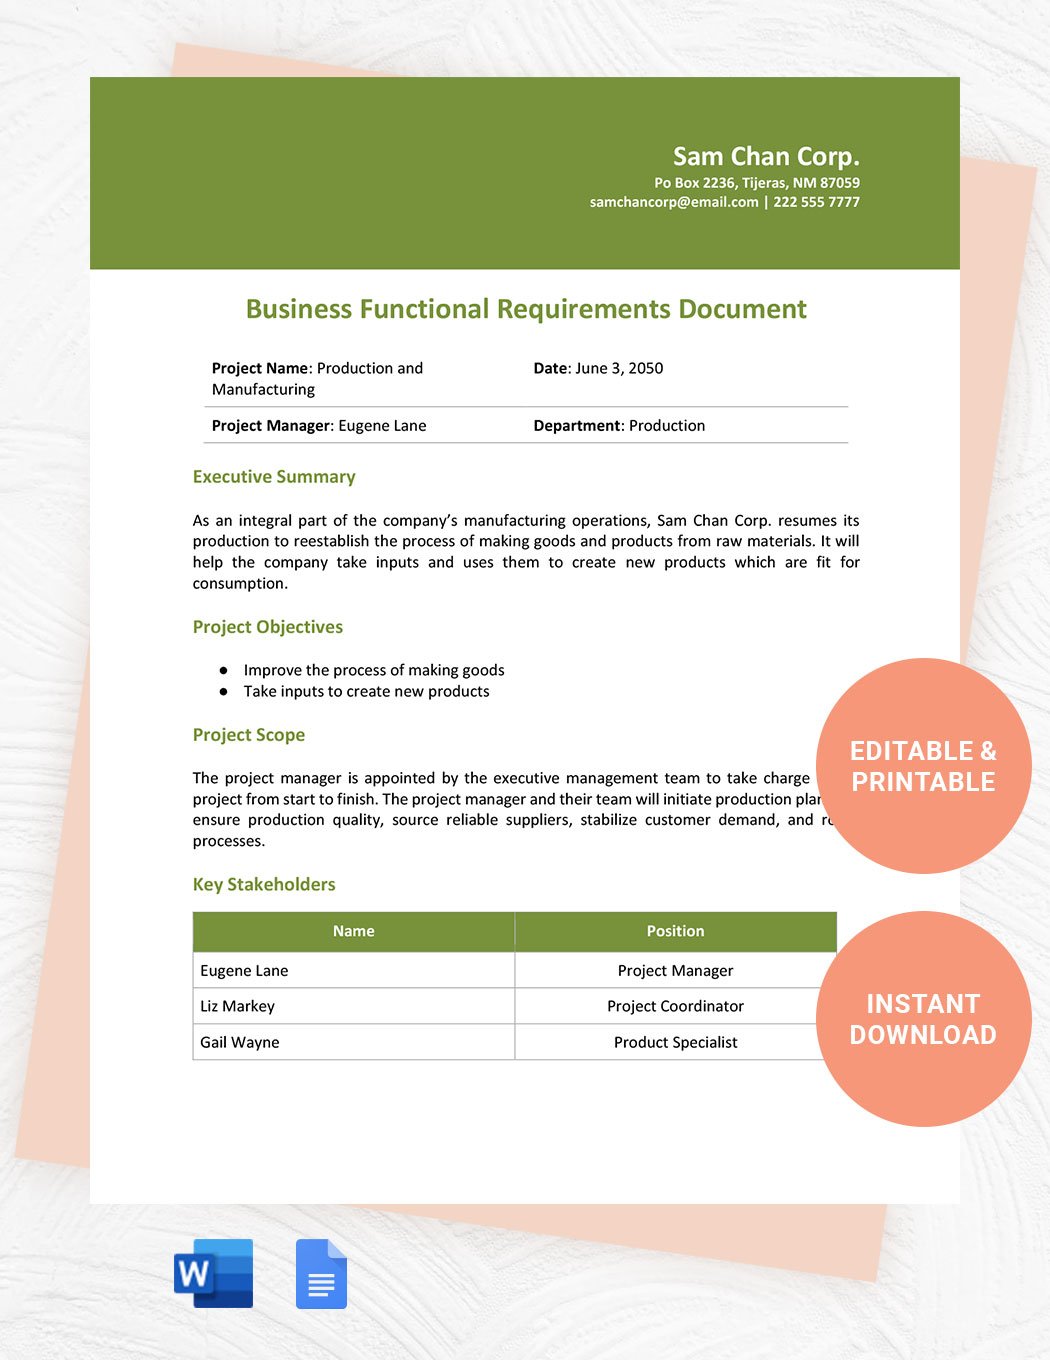 Business Functional Requirements Document Template in Word, Google Docs